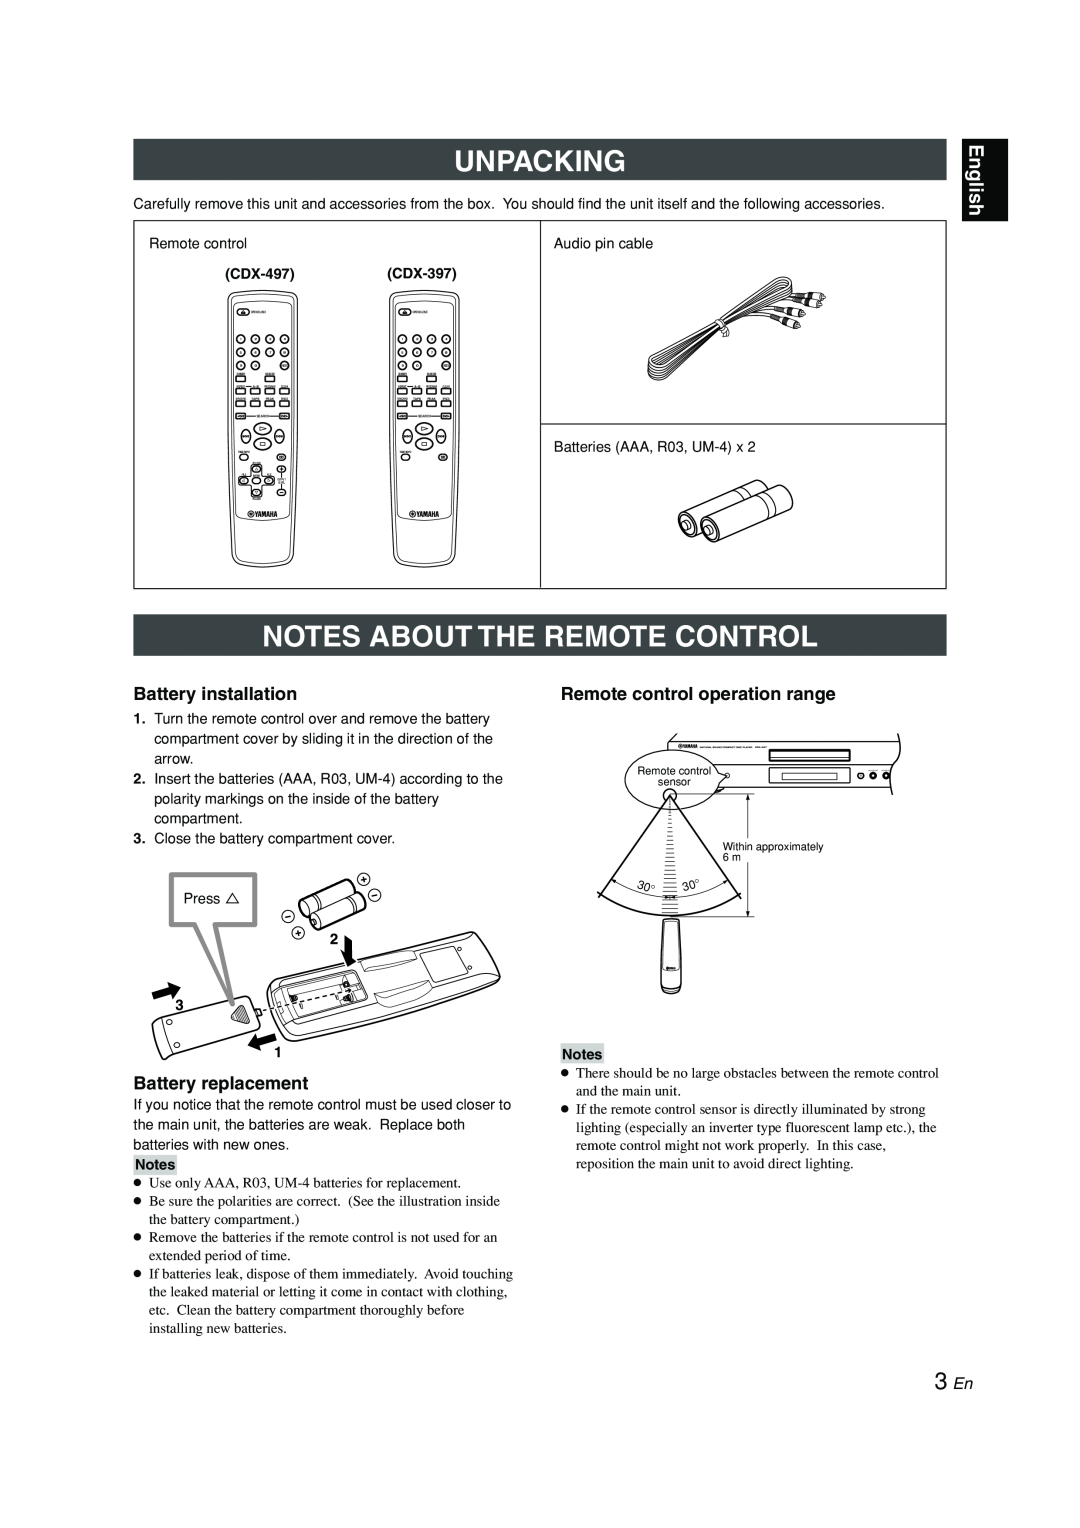 Yamaha CDX-97, CDX-397 owner manual Unpacking, Notes About The Remote Control, 3 En, English 